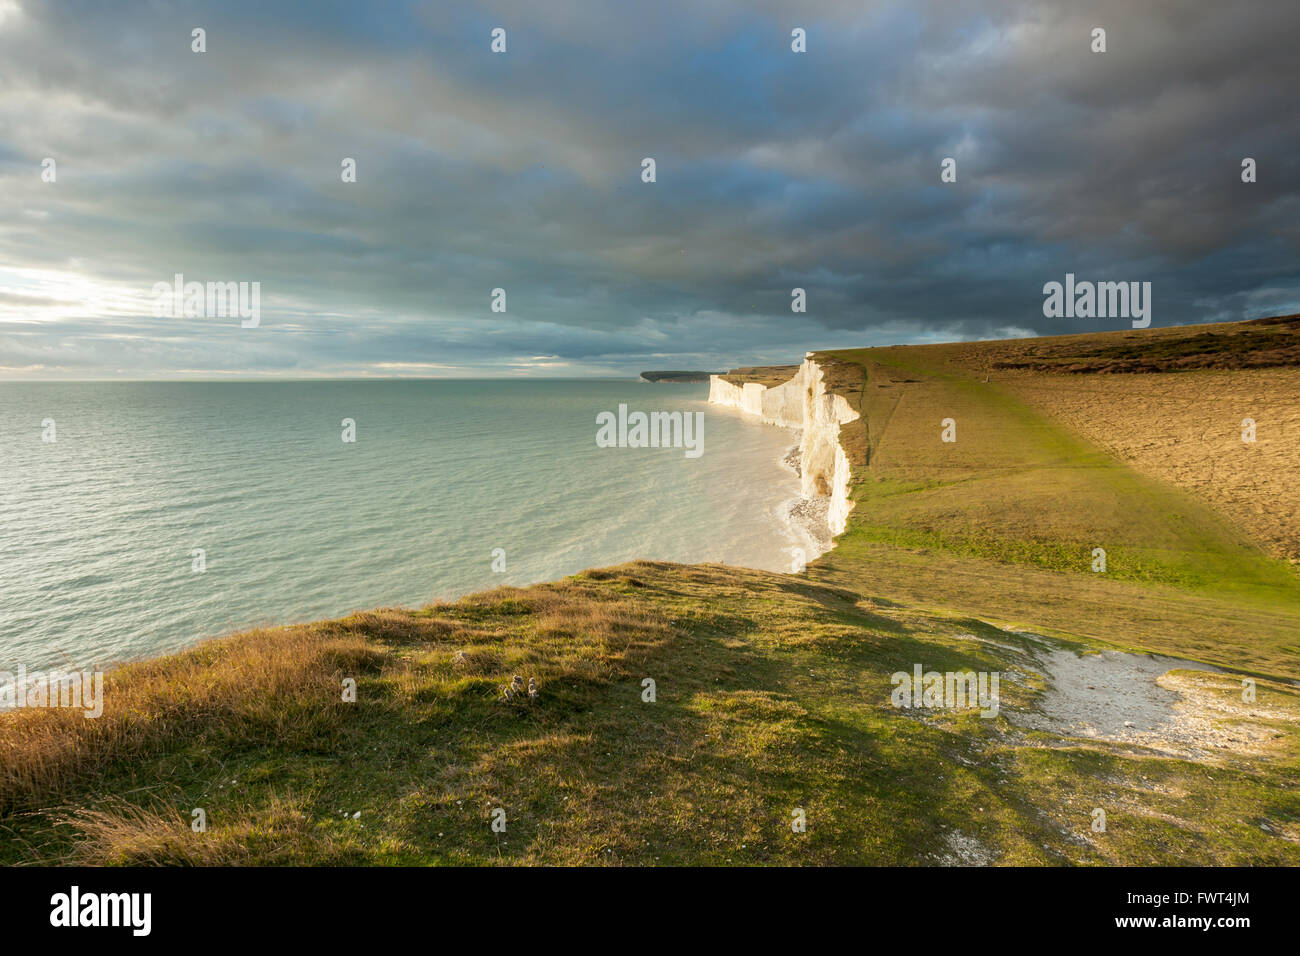 Afternoon at Seven Sisters cliffs, East Sussex, England. Stock Photo